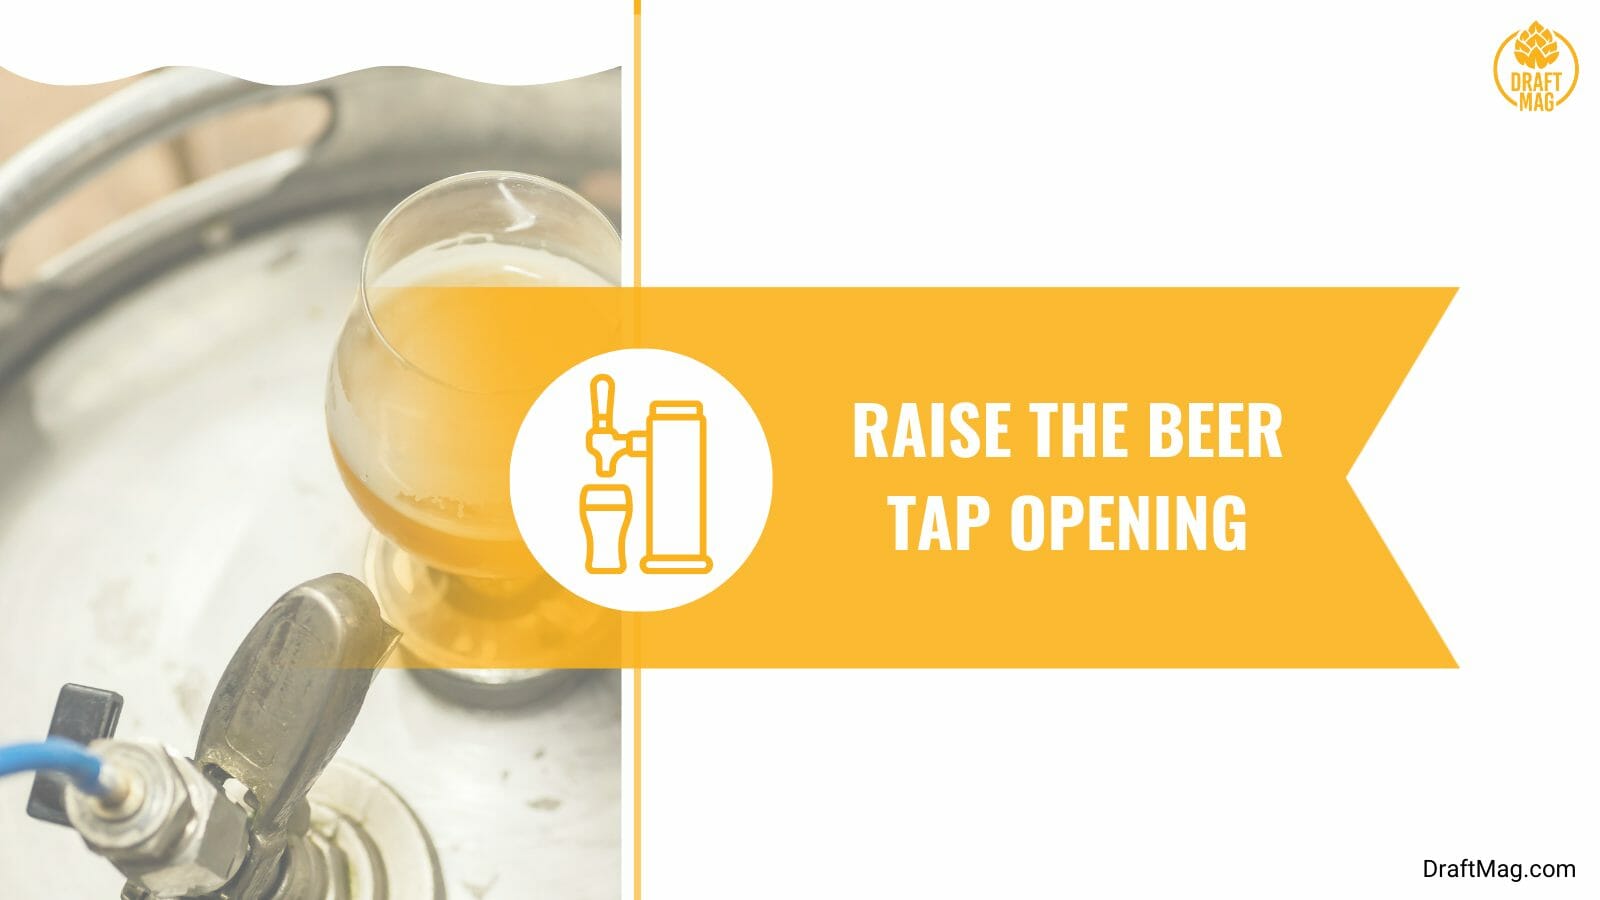 Raise the beer tap opening